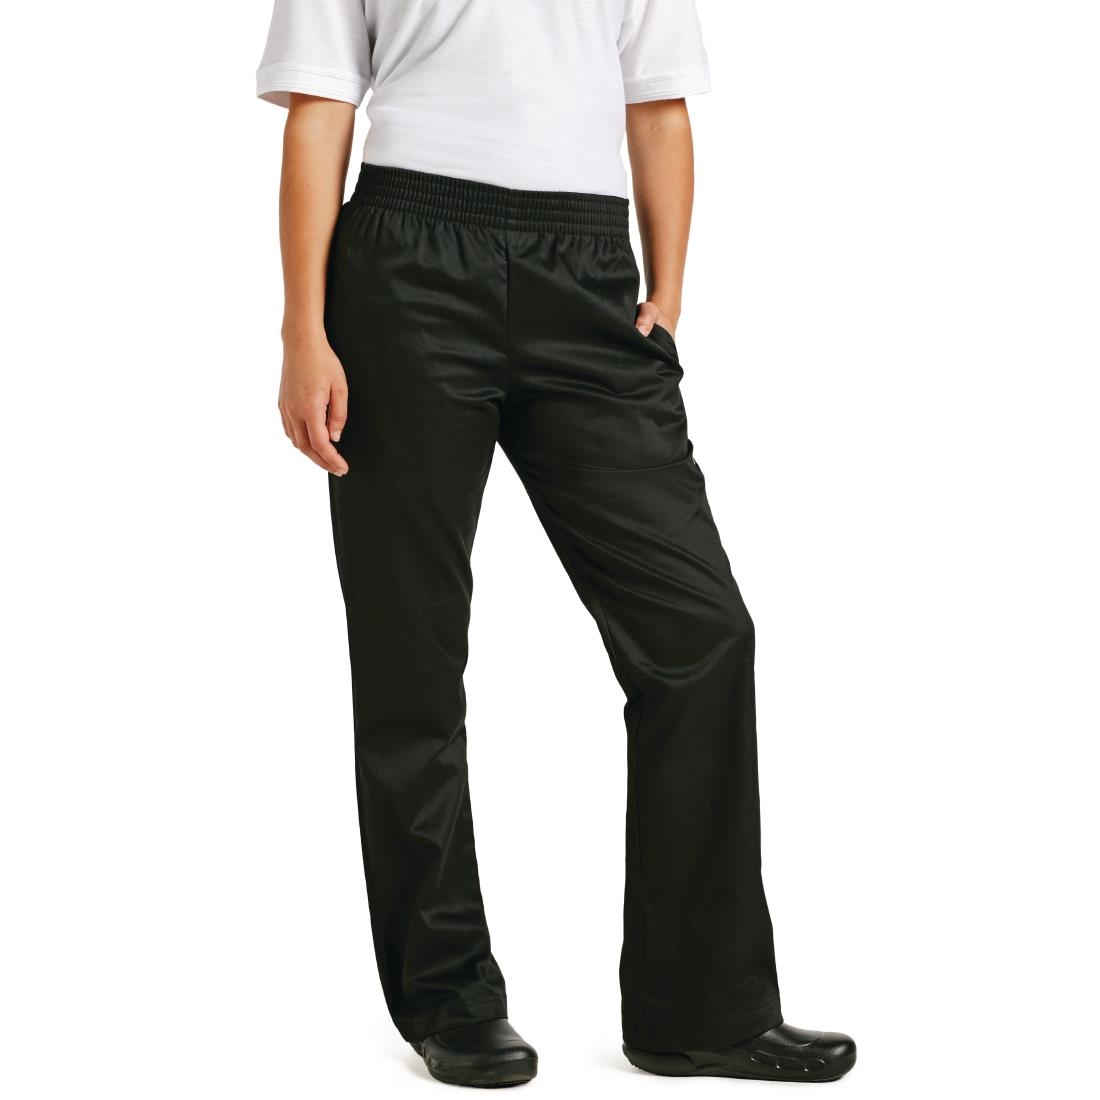 Essential Chef's Trousers - Unisex - The Work Uniform Company